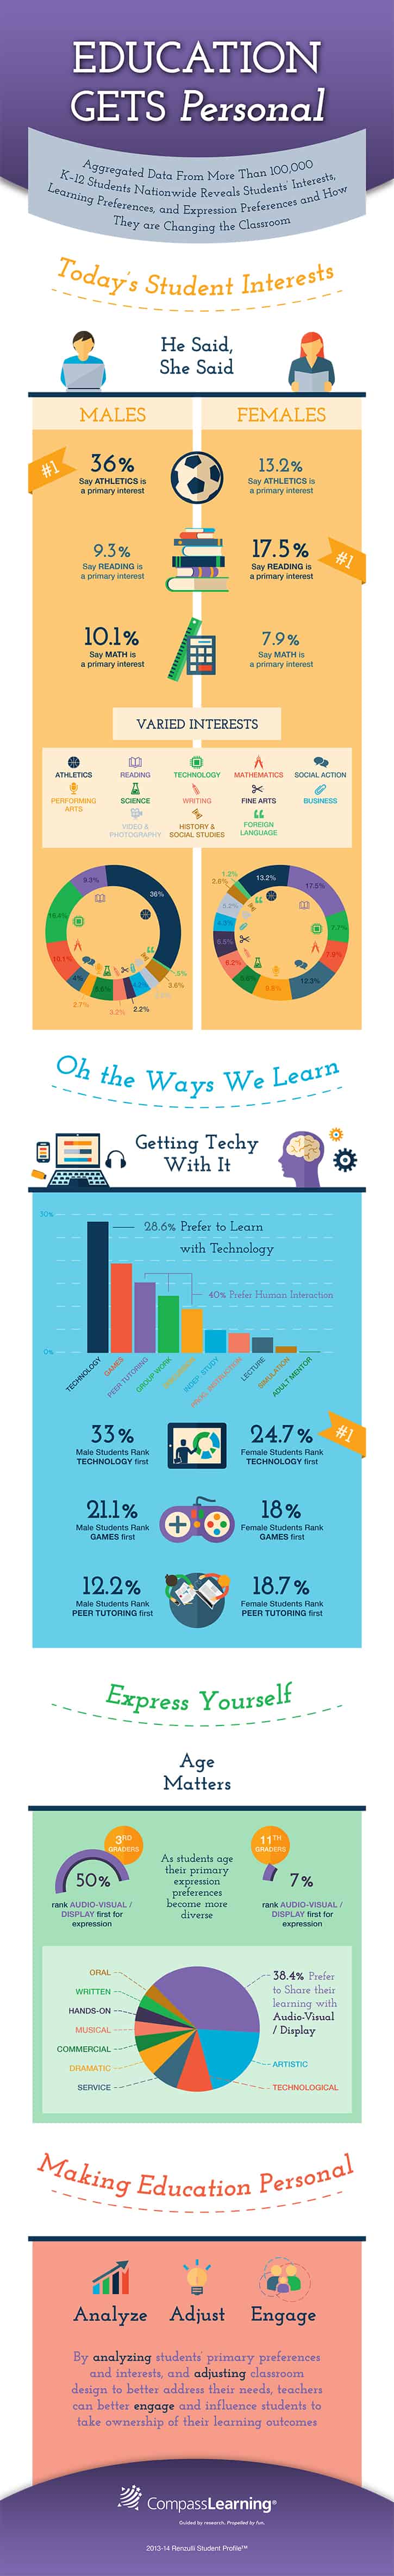 CompassLearning_Infographic_100814[1] copy